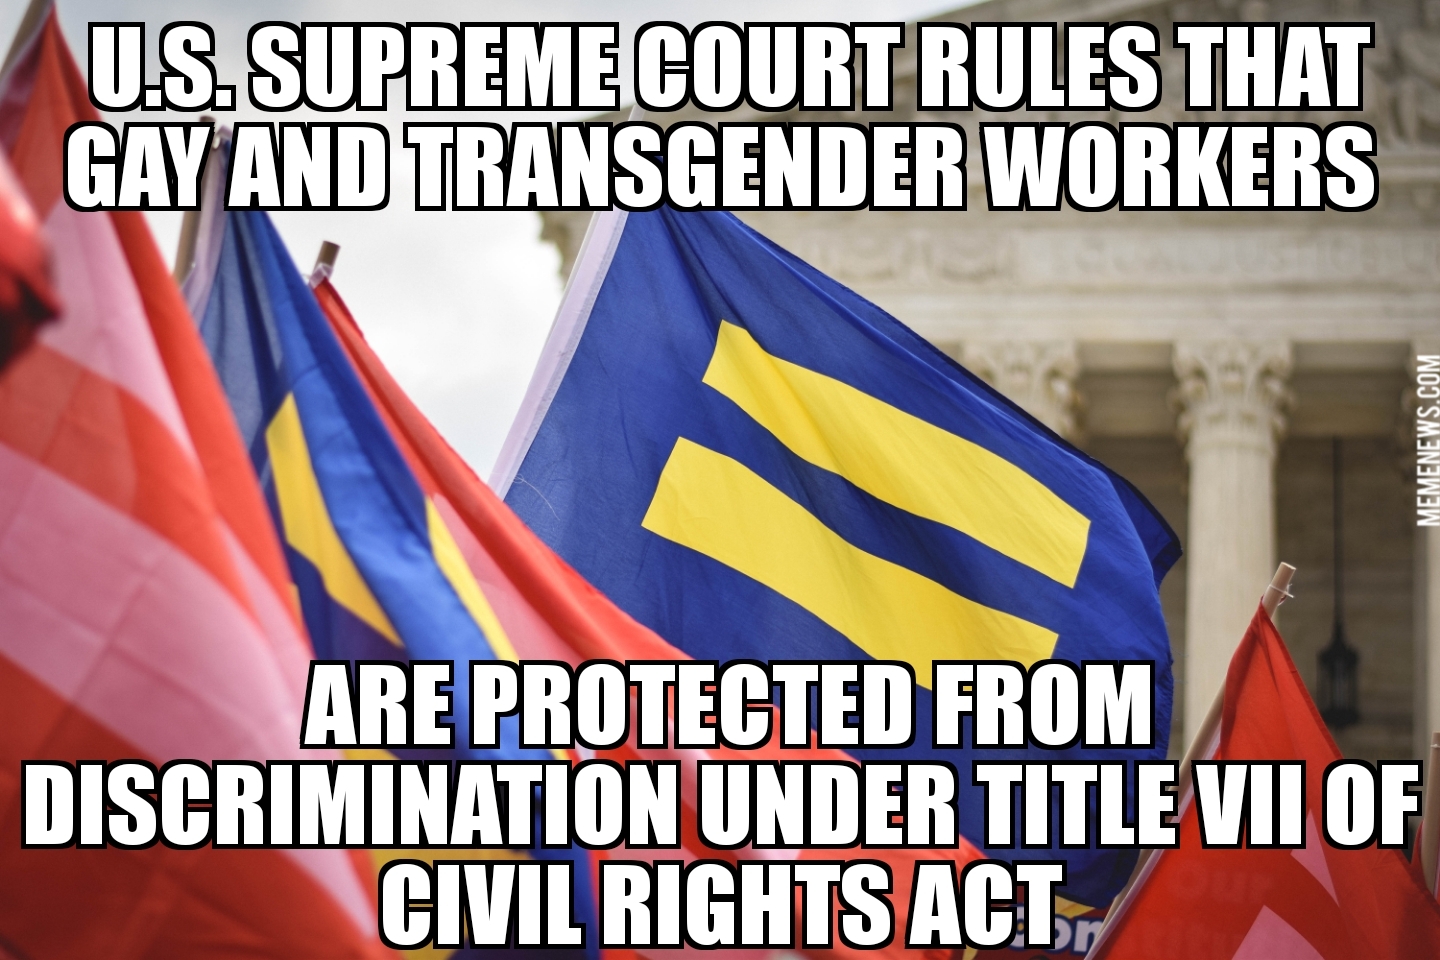 Supreme Court rules LGBT workers protected under Civil Cights Act